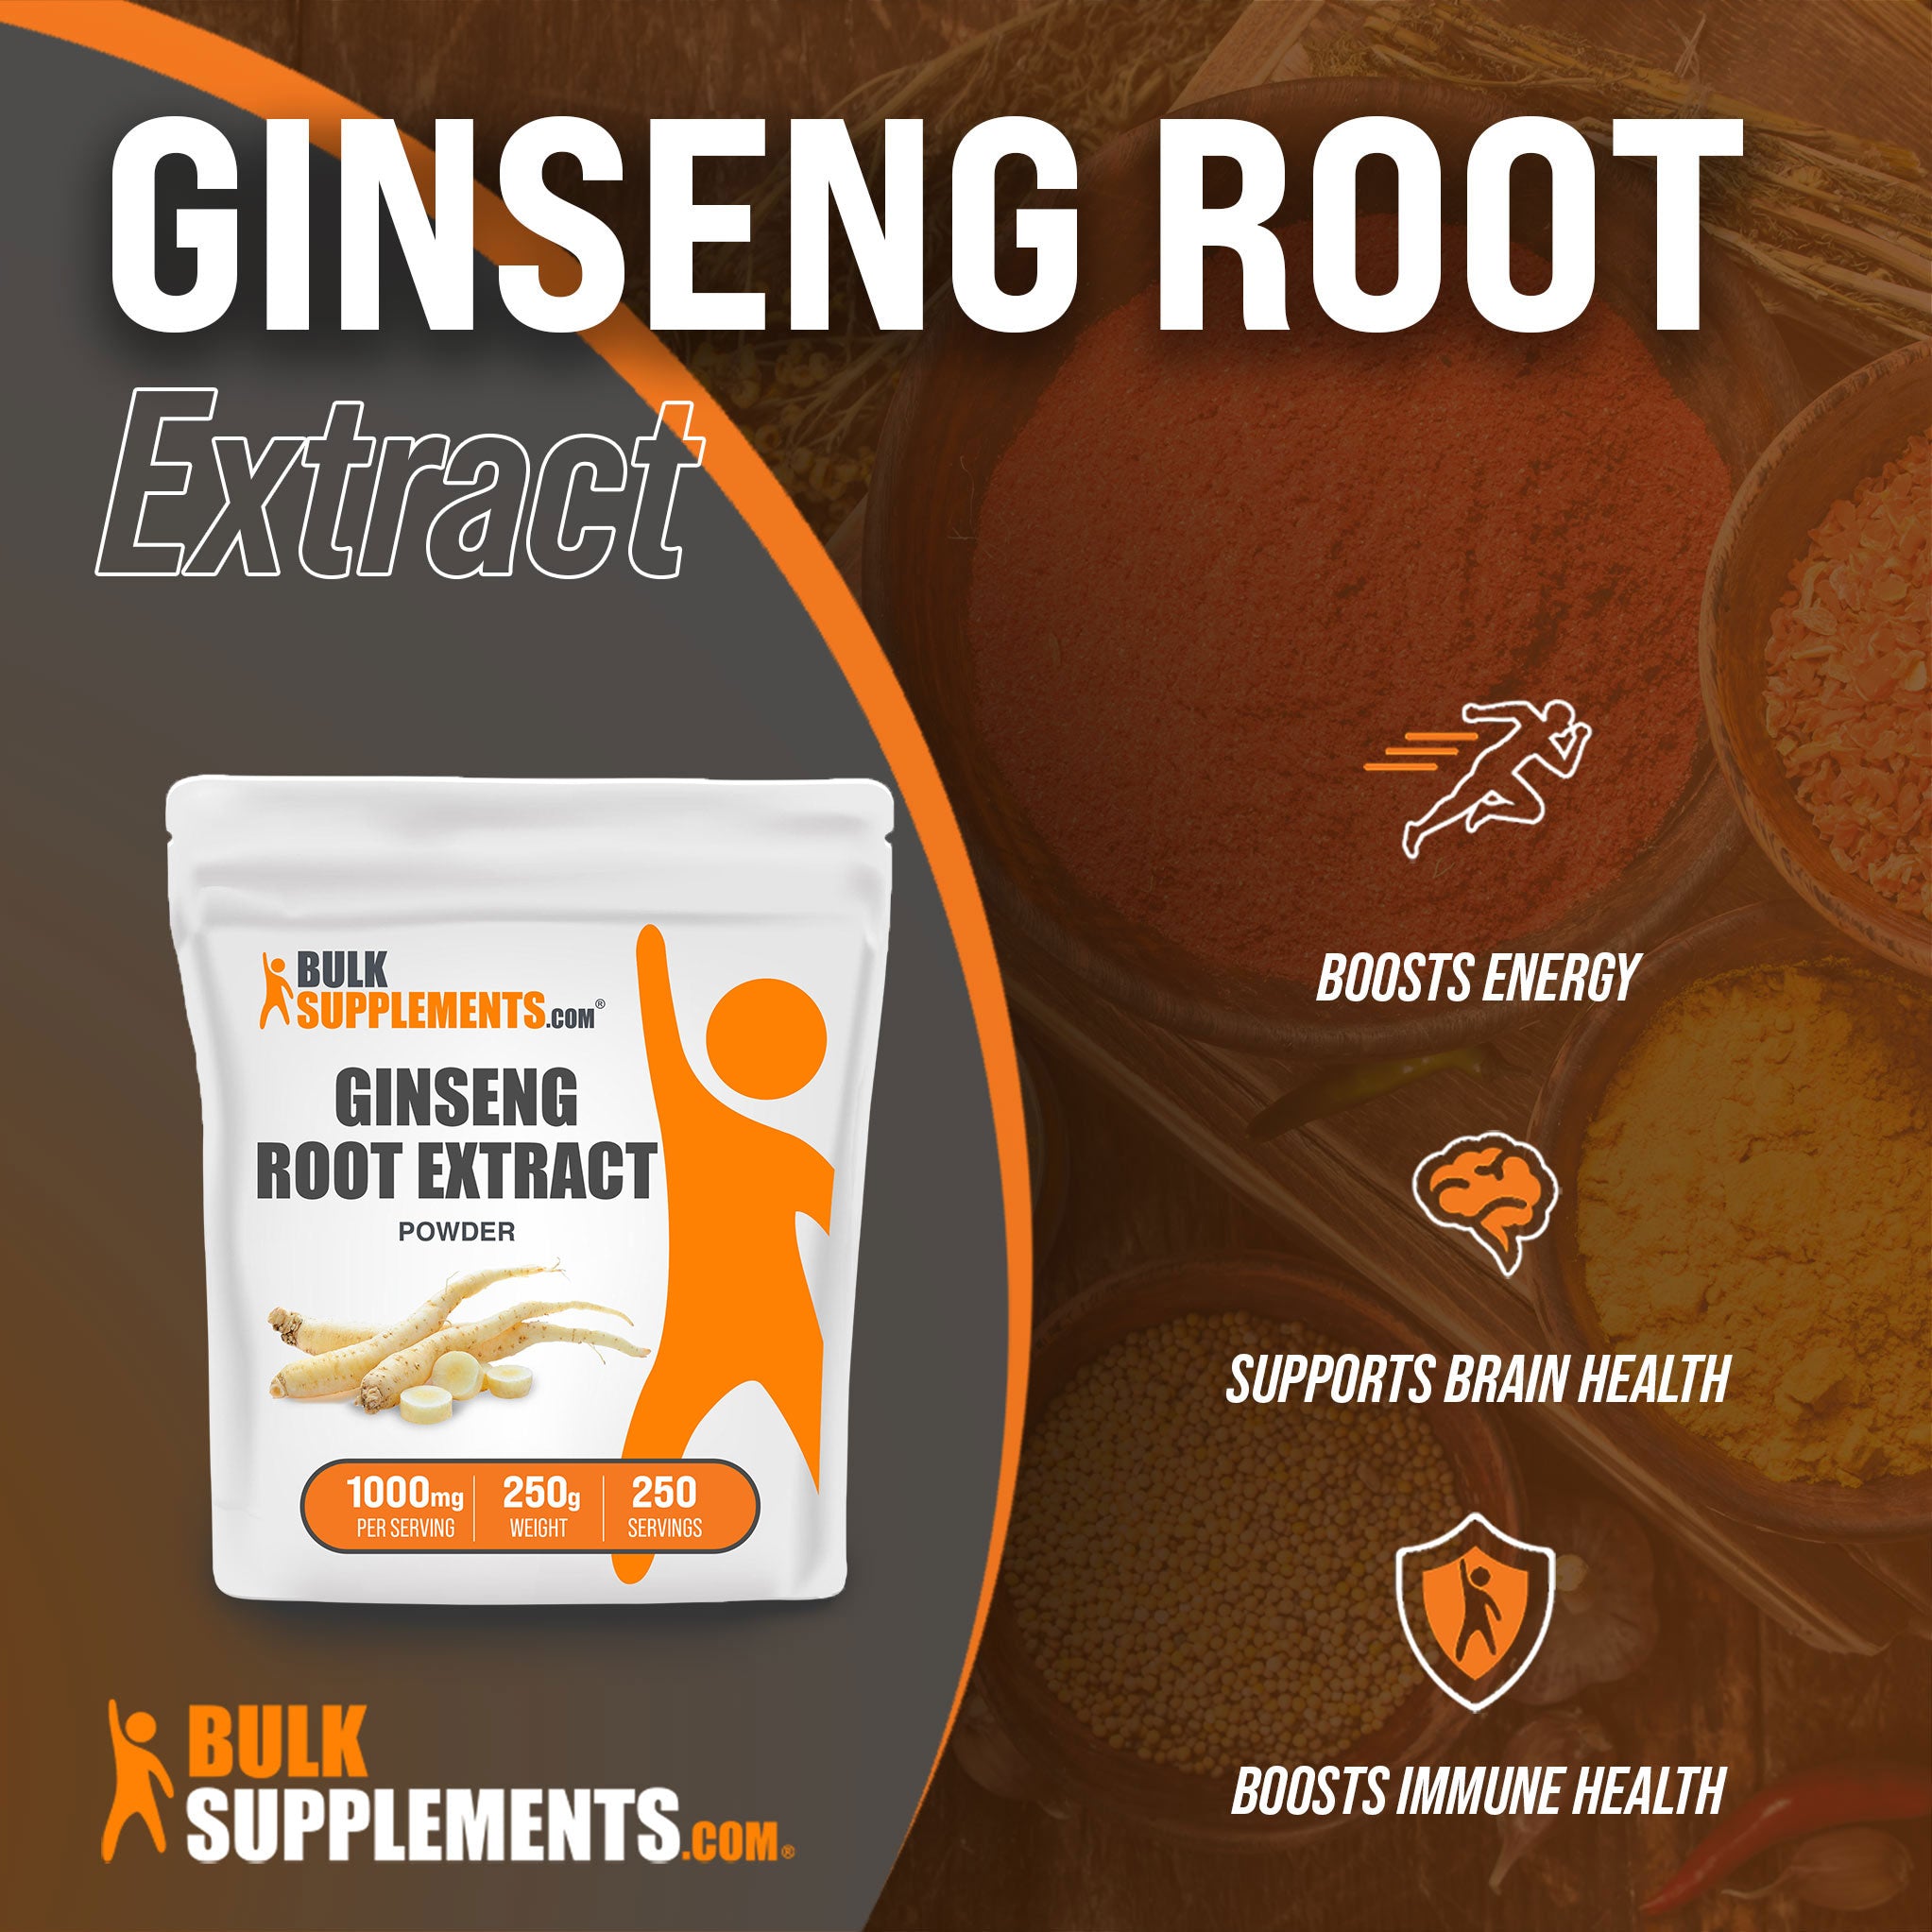 Benefits of Ginseng Root Extract; boosts energy, supports brain health, boosts immune health